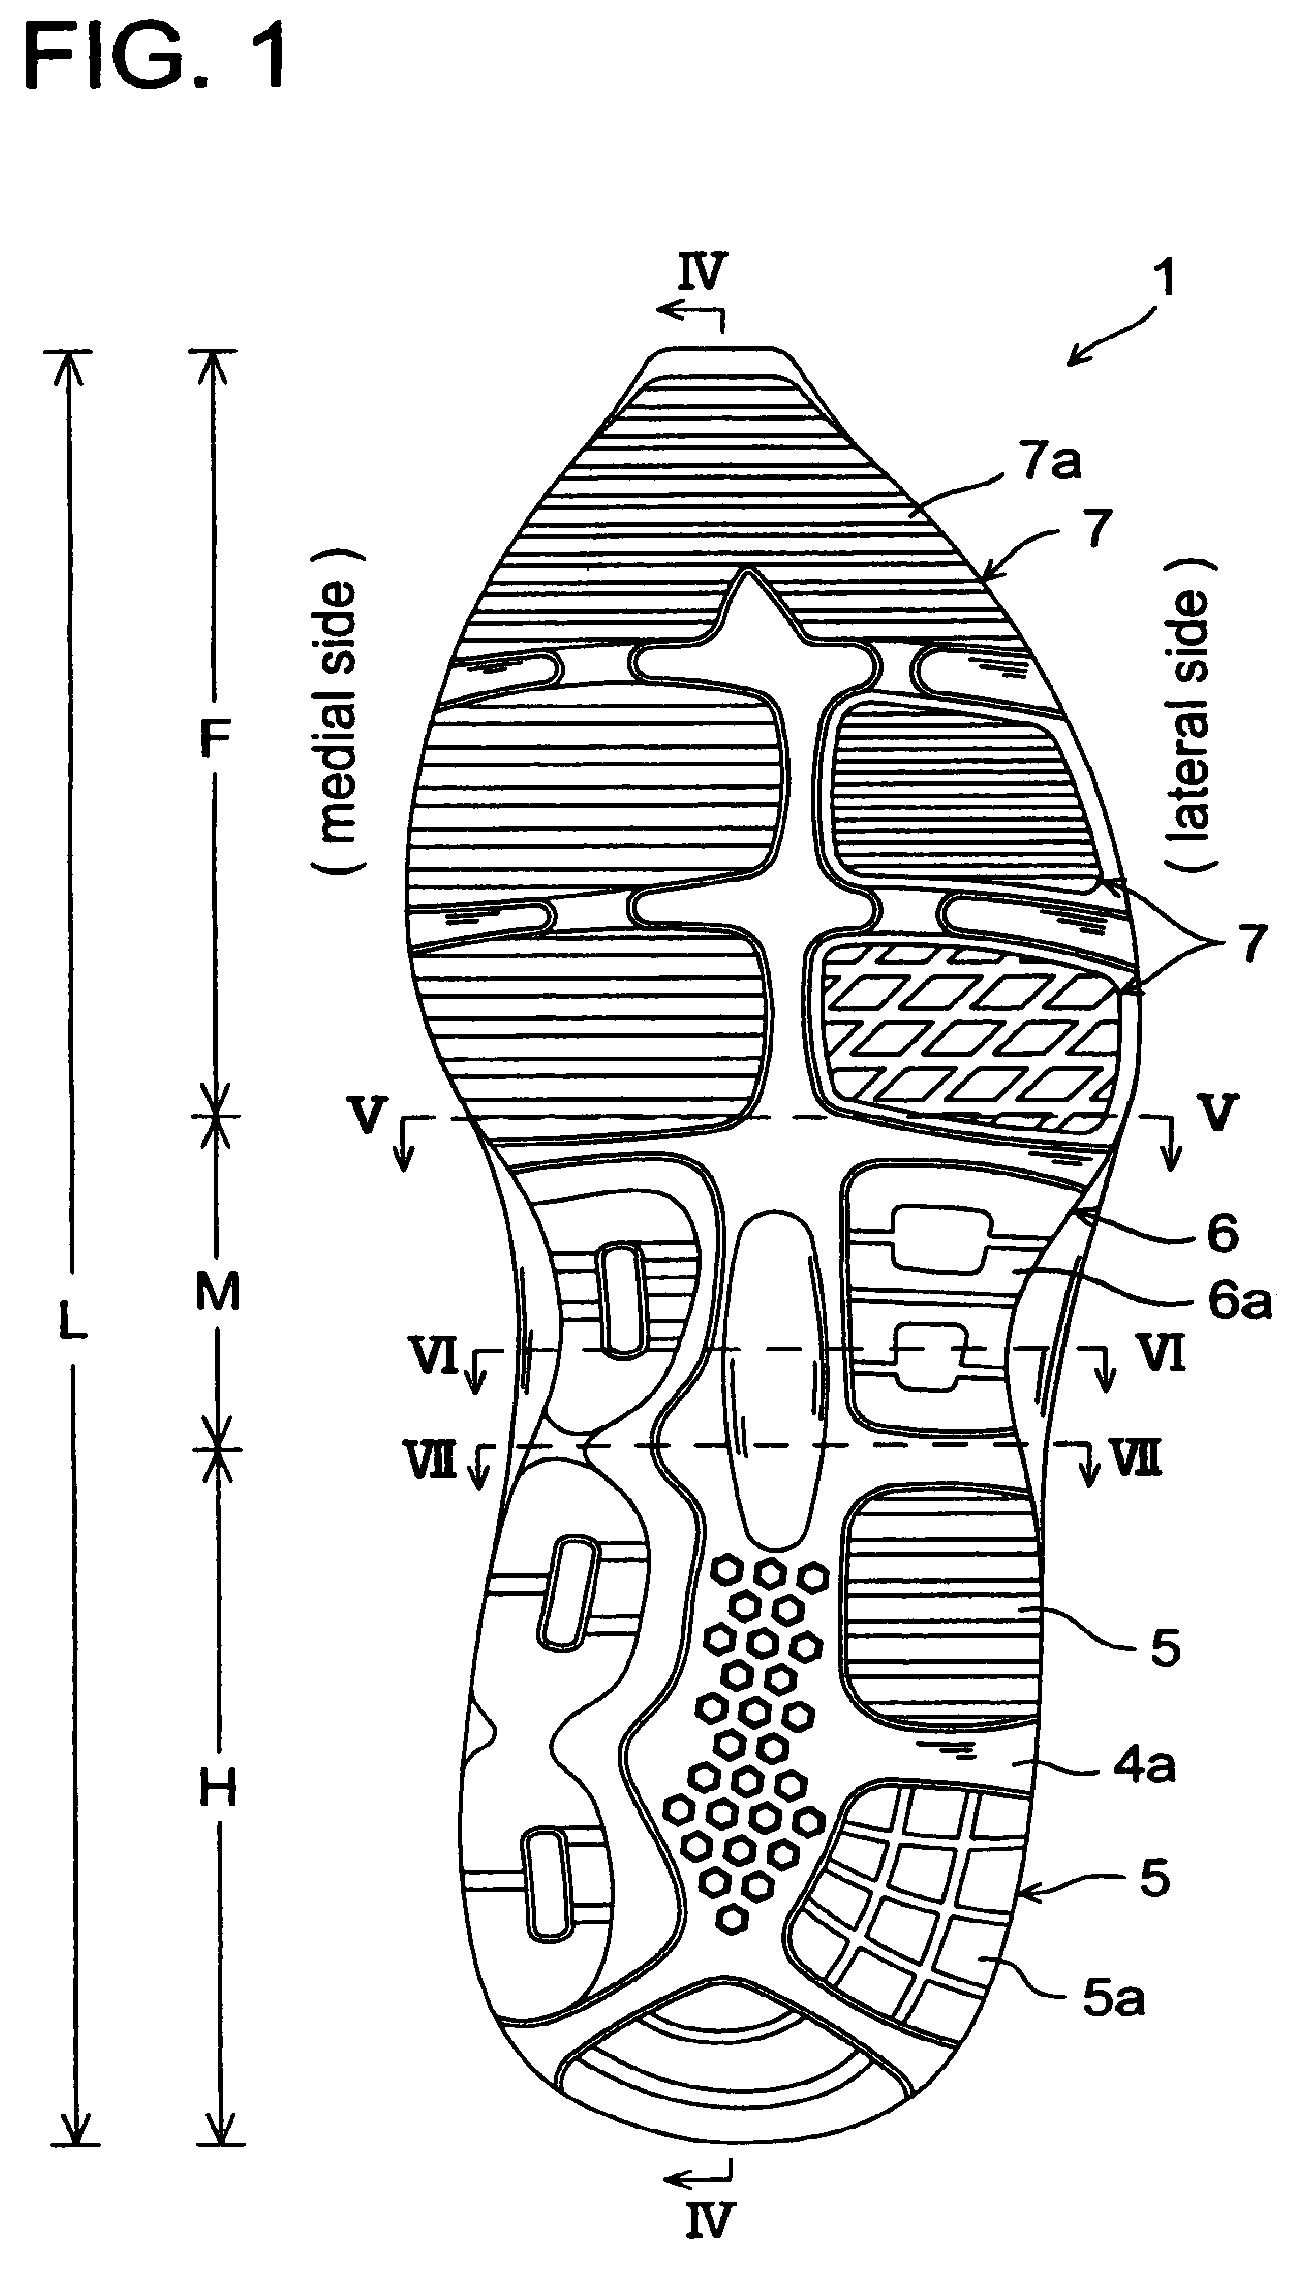 Midfoot structure of a sole assembly for a shoe